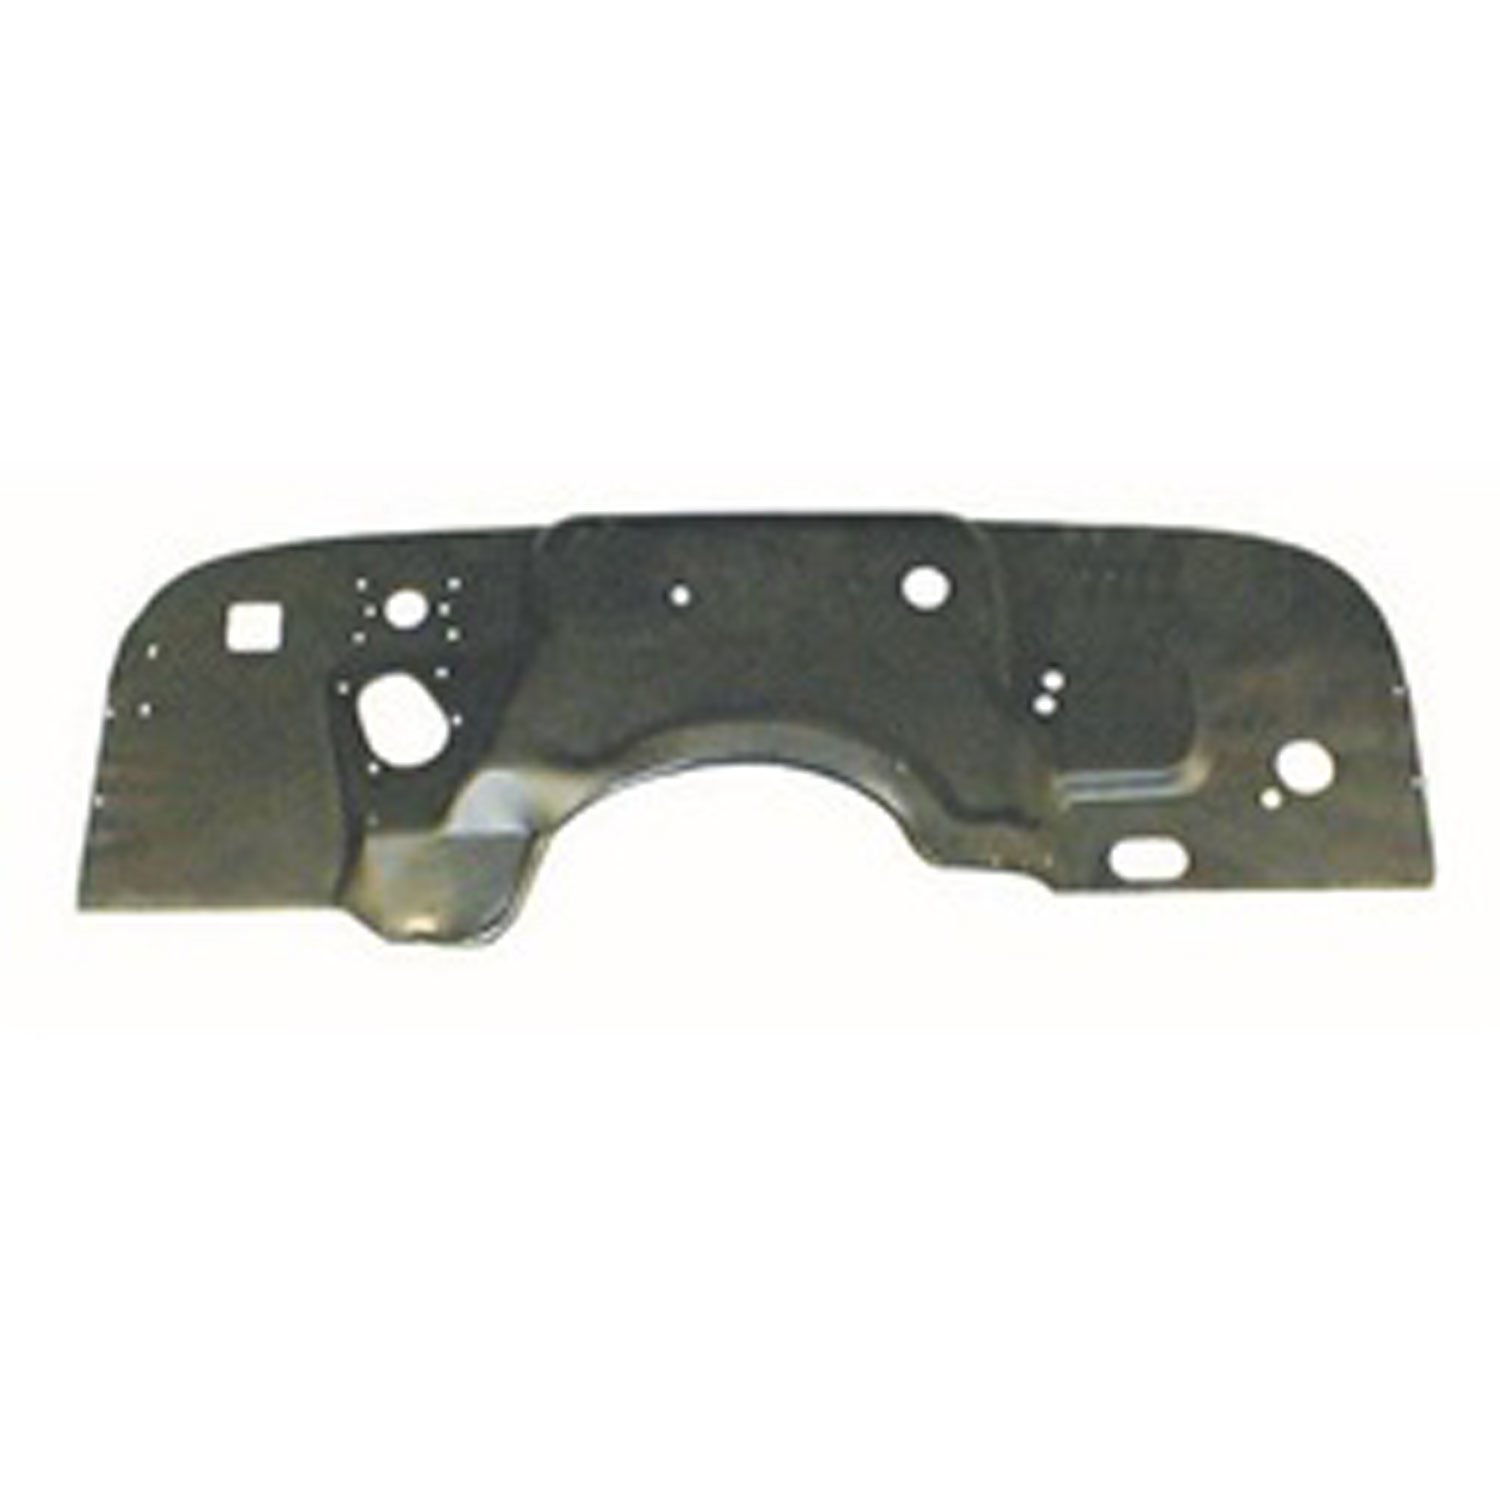 Firewall Panel for Select 1976-1986 Jeep CJ Models